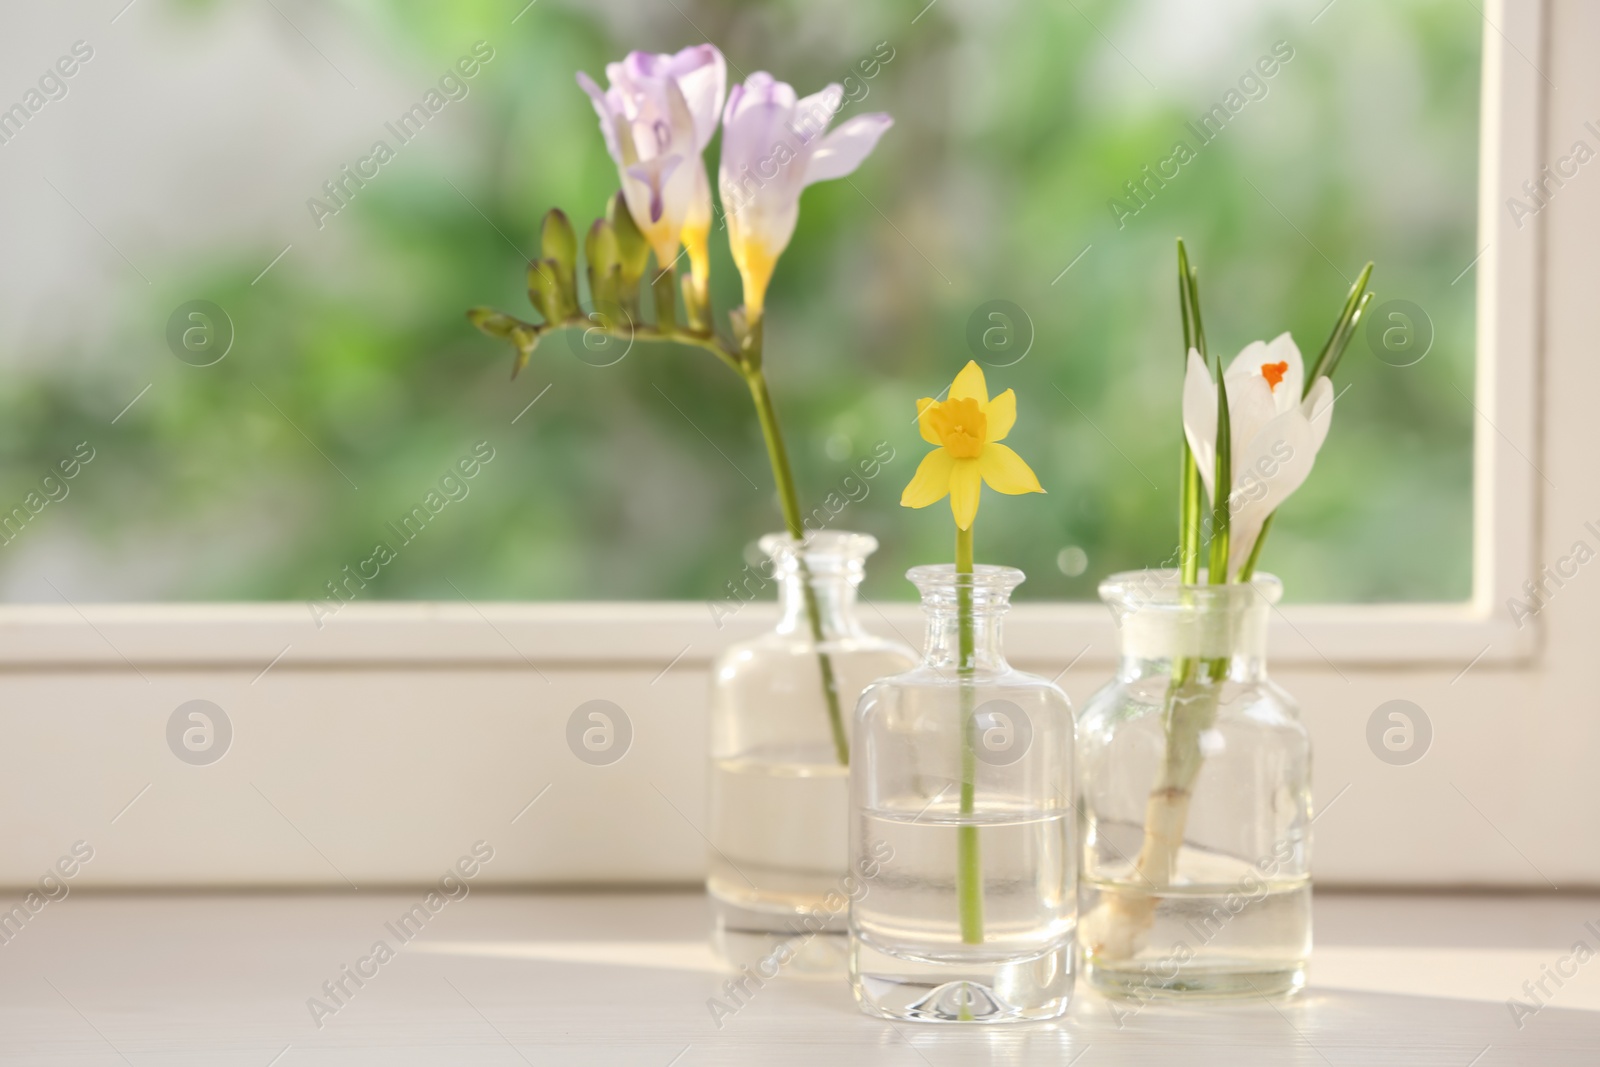 Photo of Beautiful spring flowers on window sill indoors